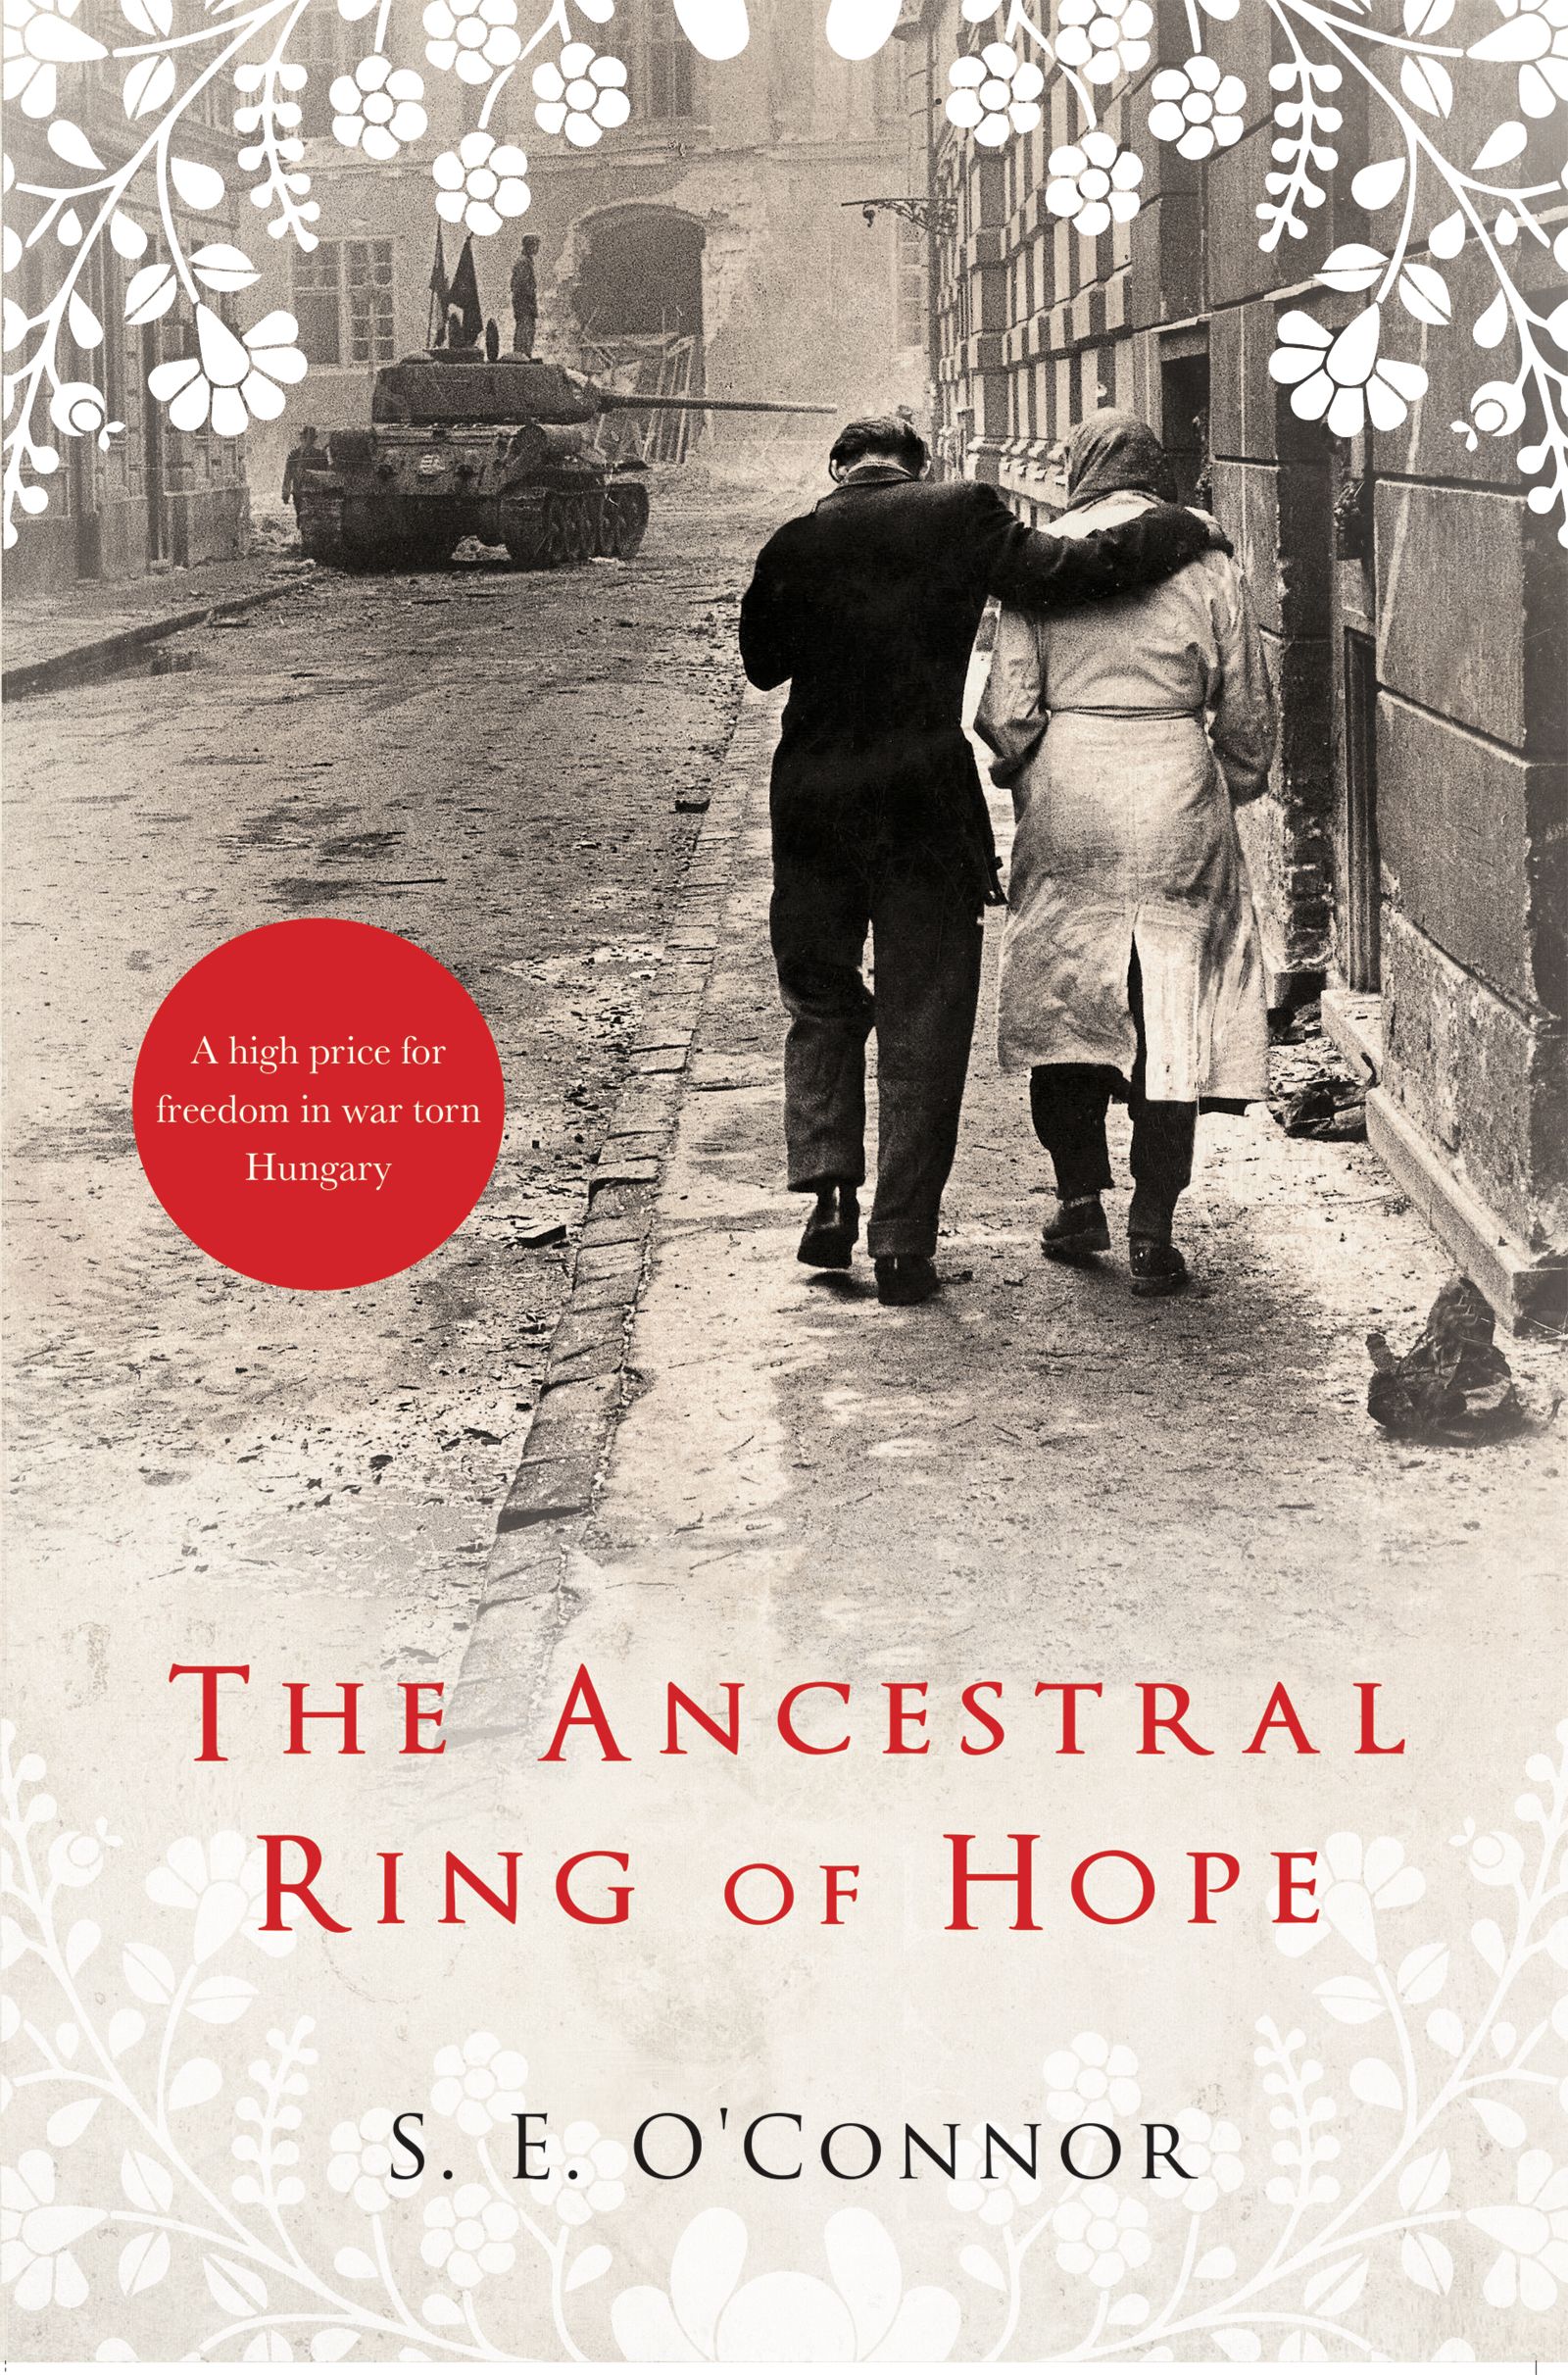 Stock image cover example: The Ancestral Ring of Hope